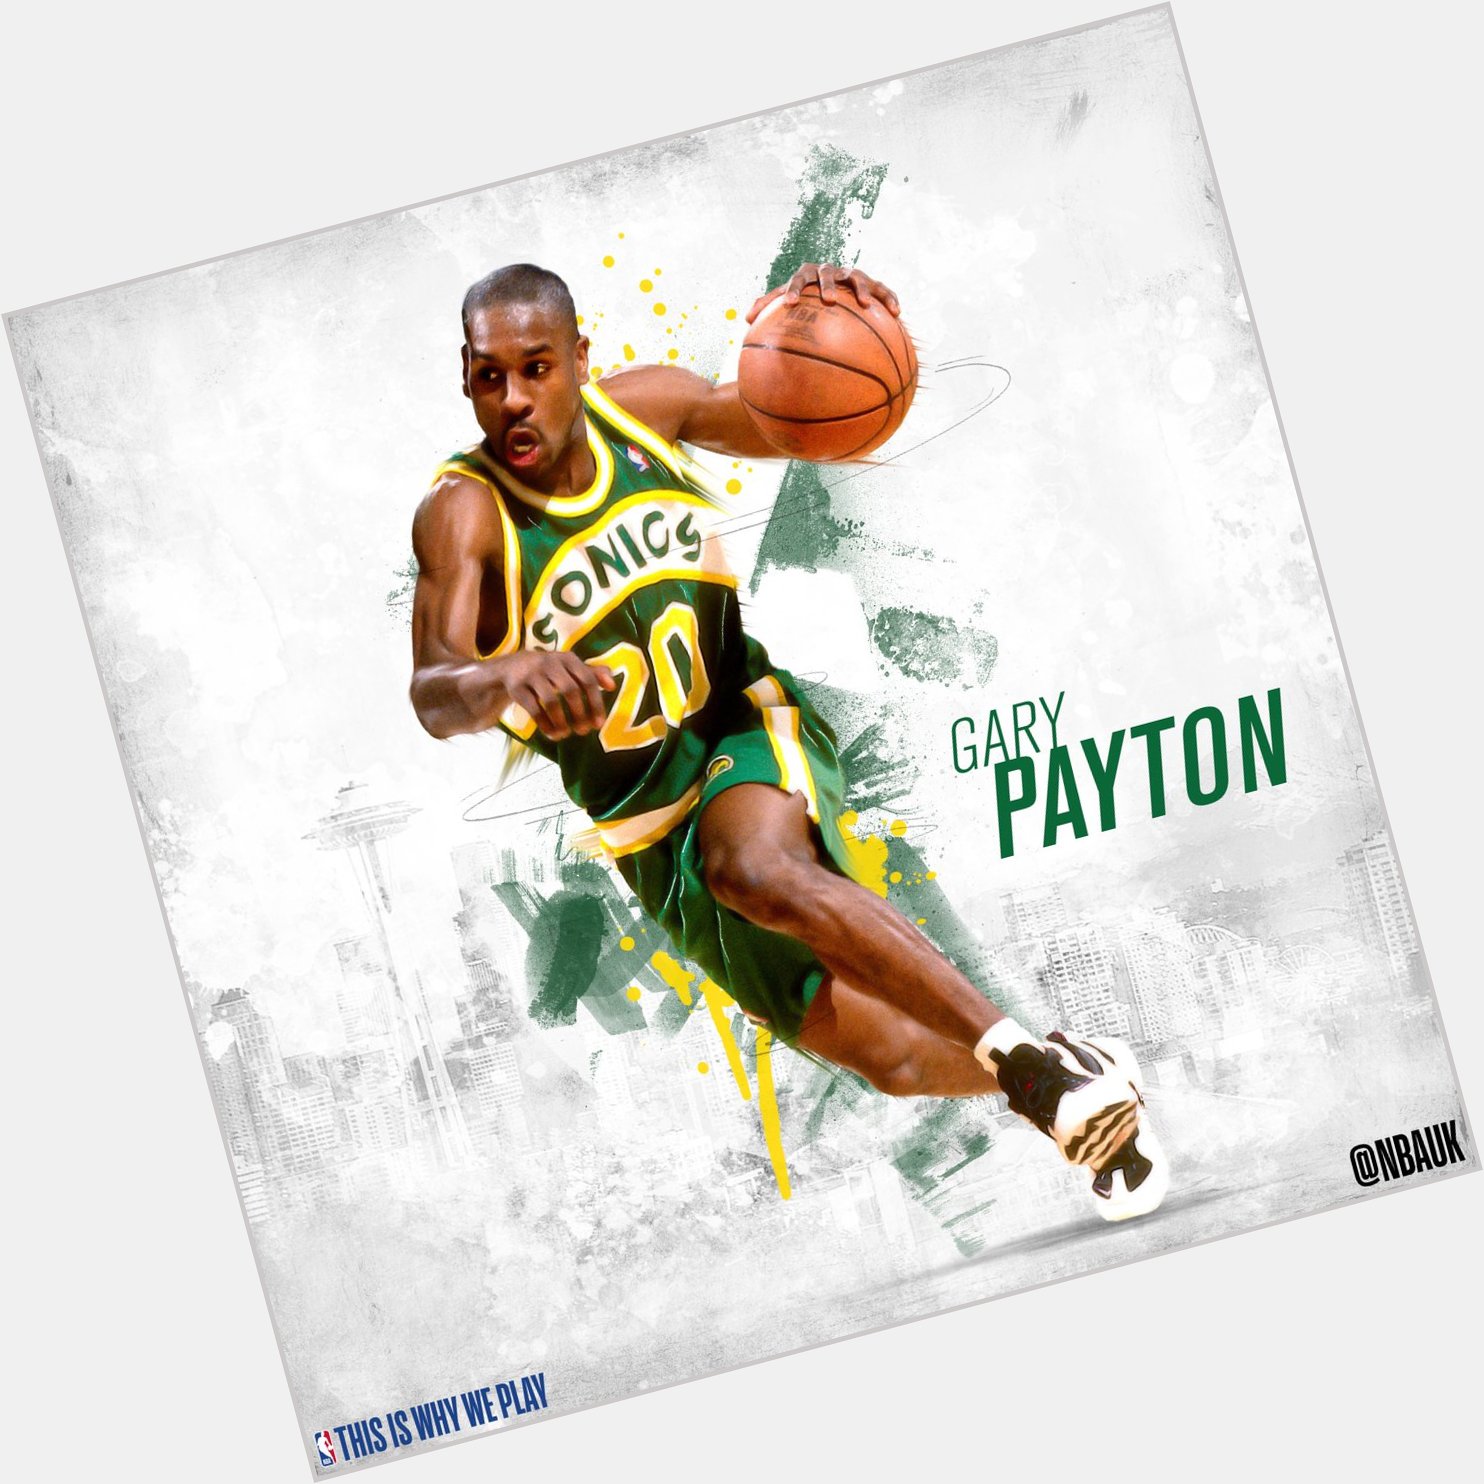 Happy Birthday to Gary Payton  The Glove had over 2400 steals in his career. 

Pickpocket 